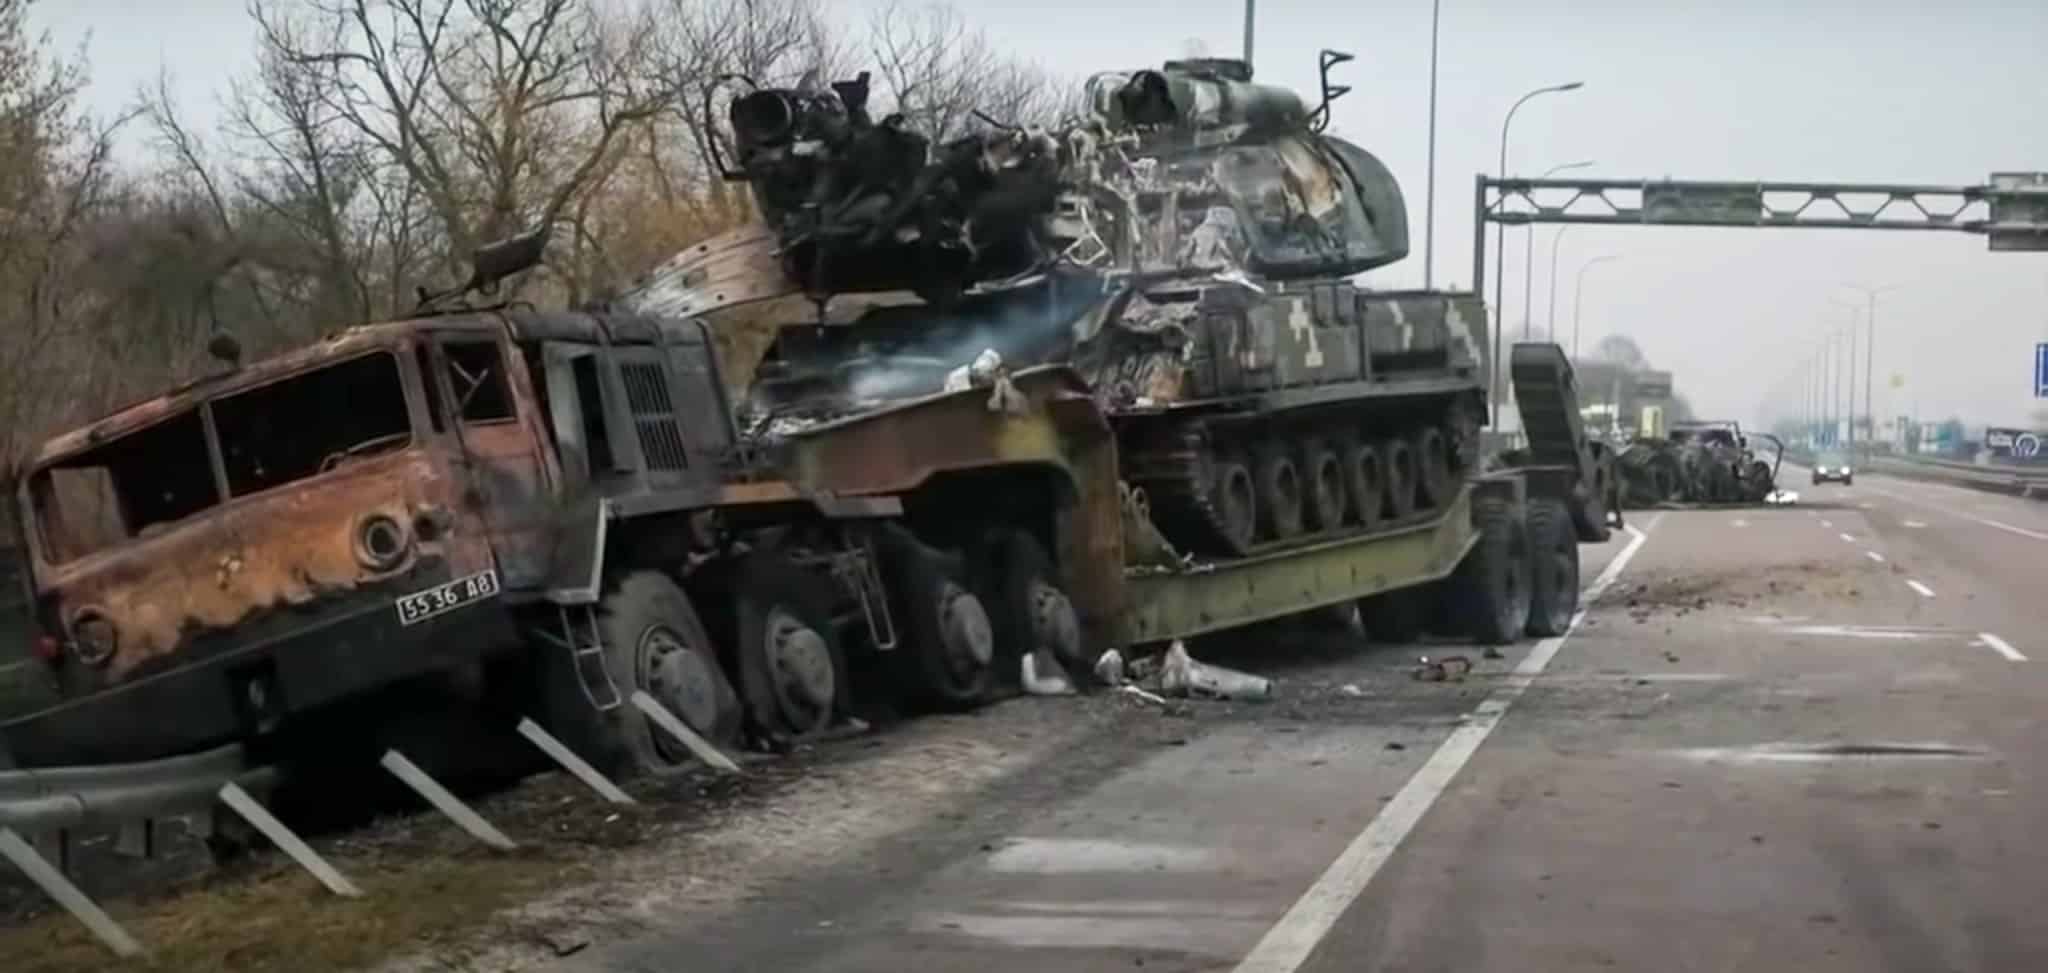 The smoking wreckage of a Russian vehicle lies by the side of the road in Ukraine. (BBC News/Youtube)